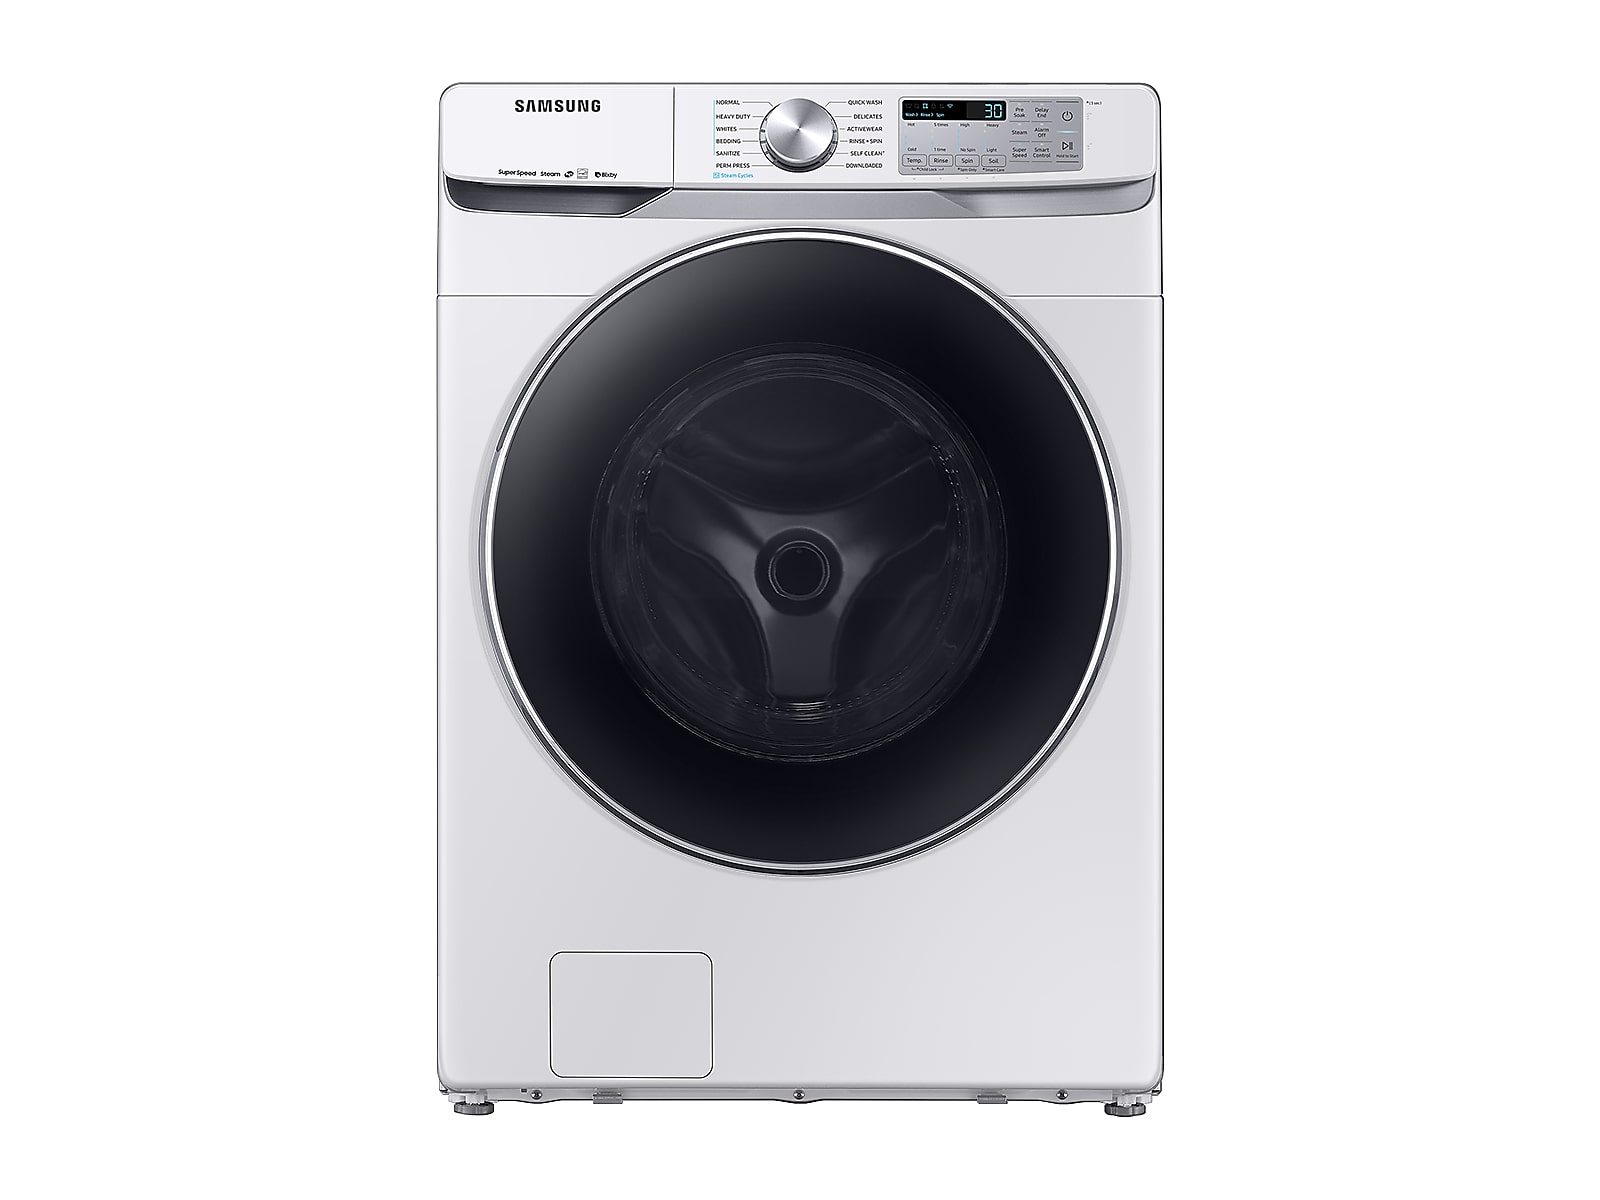 Samsung 4.5 cu. ft. Smart Front Load Washer with Super Speed in White(WF45R6300AW/US) photo